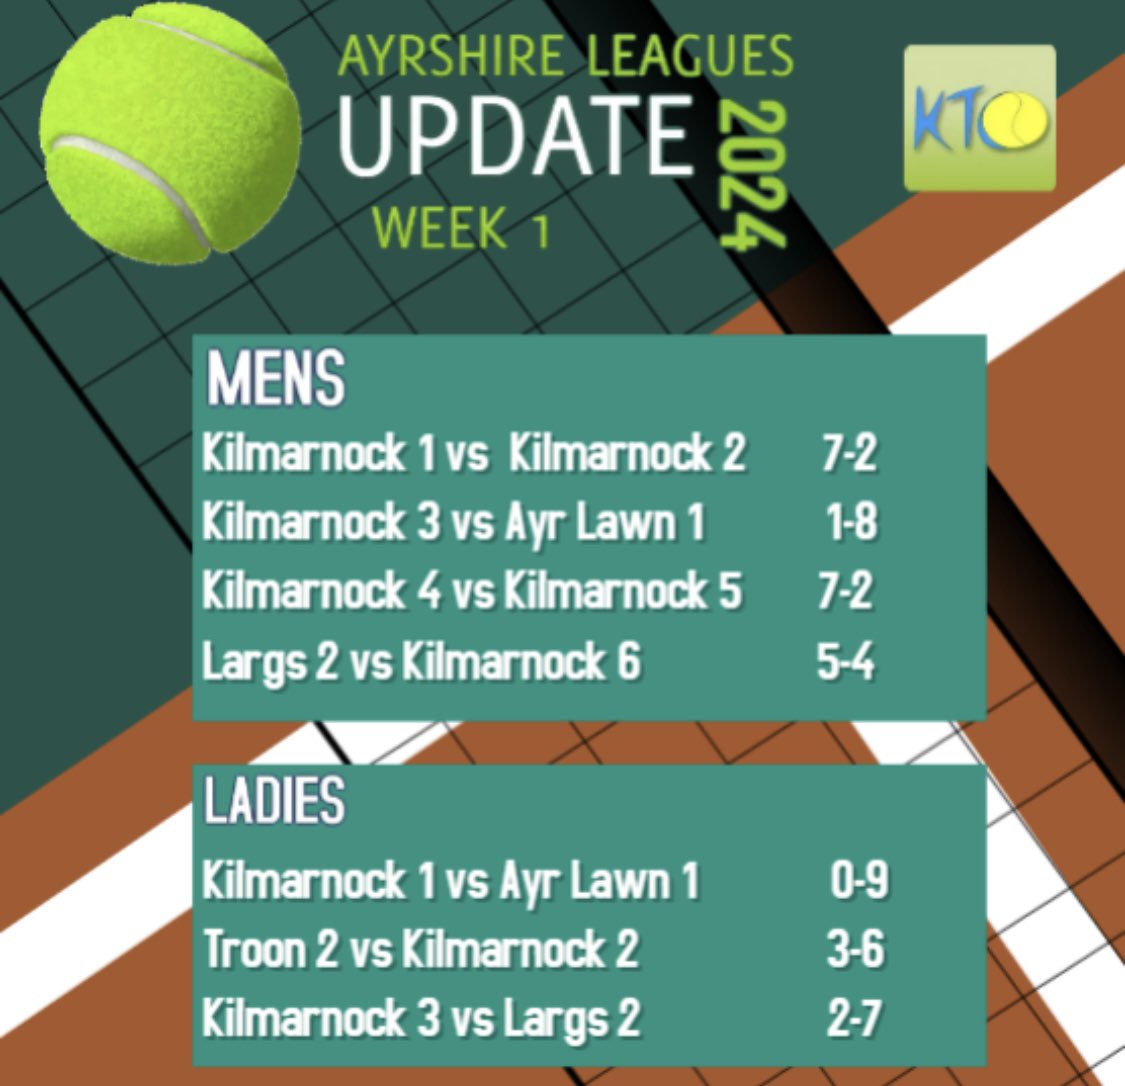 Great start to the Ayrshire Summer Leagues last week @Kilmarnock_TC Great tennis on show. 💪🏼🎾#Week1 #participation